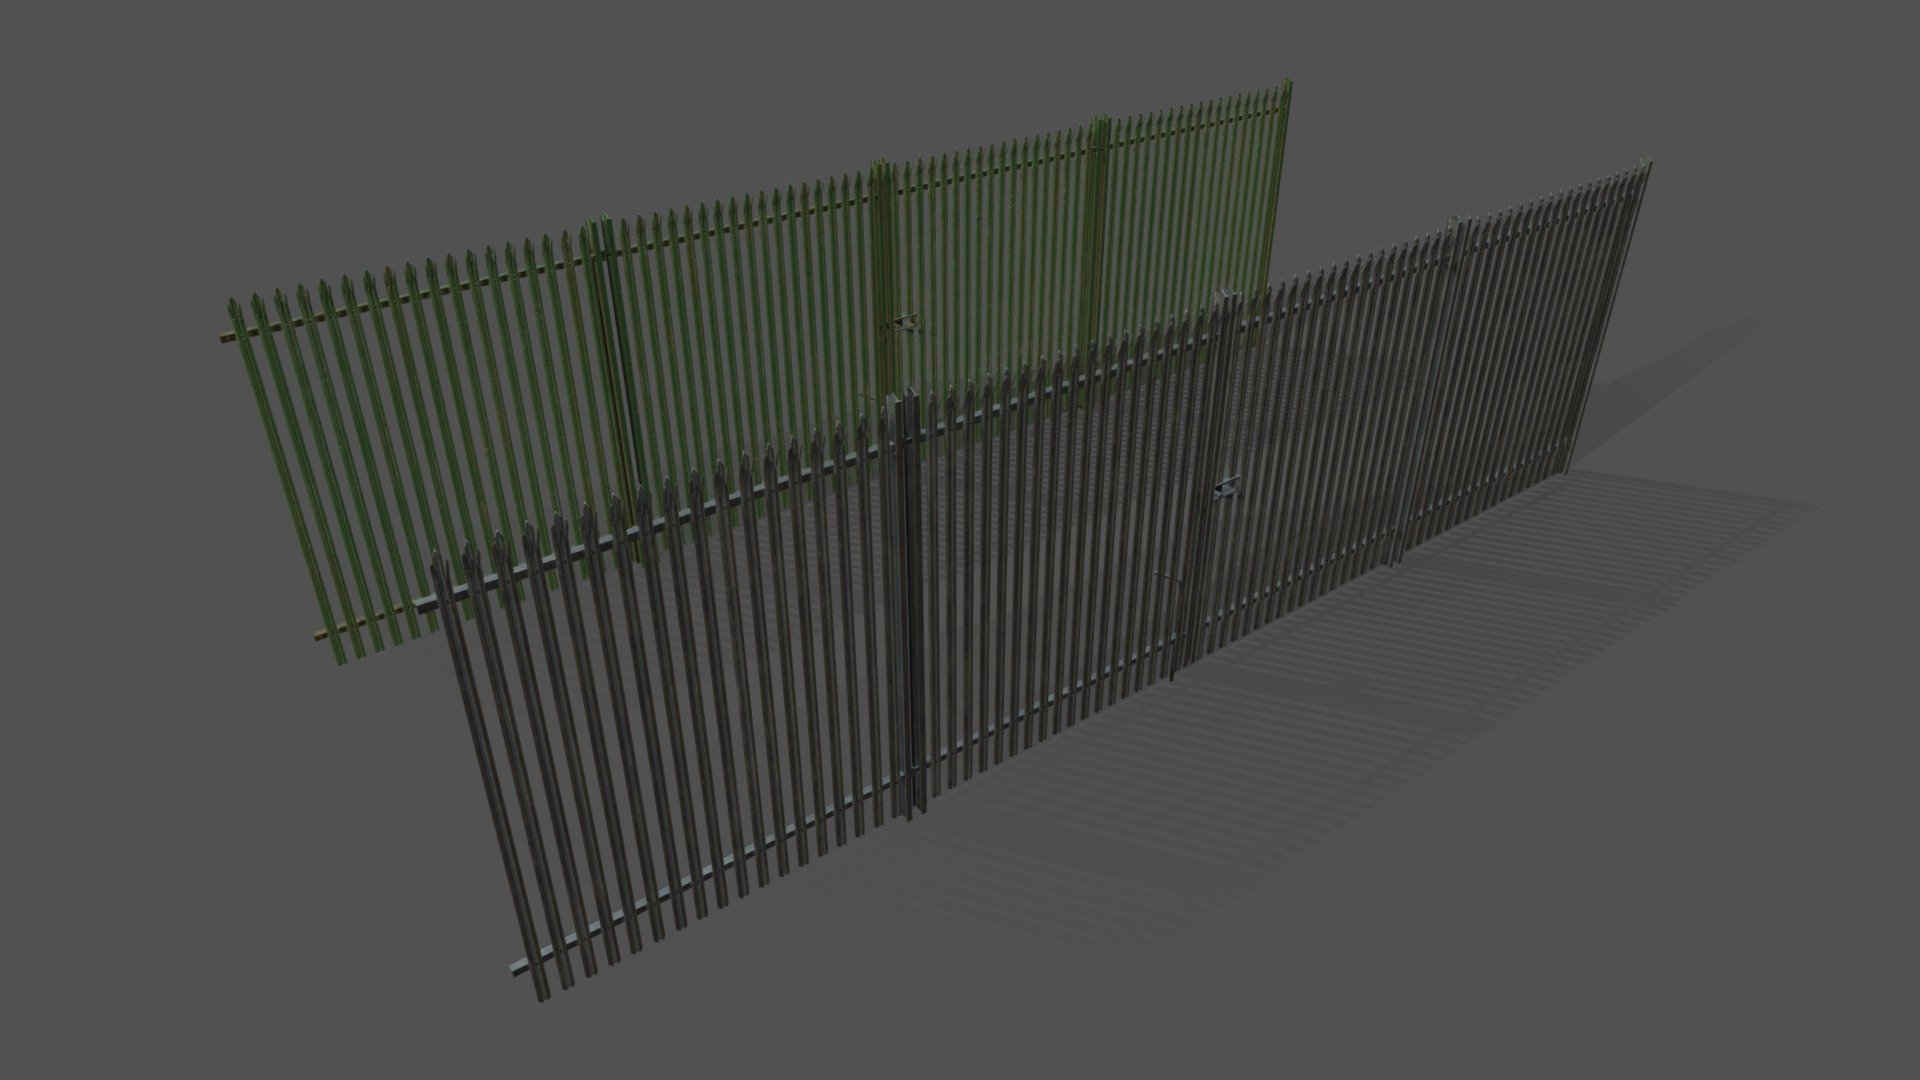 Low poly fence

Textures are 4096x4096 for both texture sets. Comes with a gate section and 2 straight sections which have different UVs 3d model